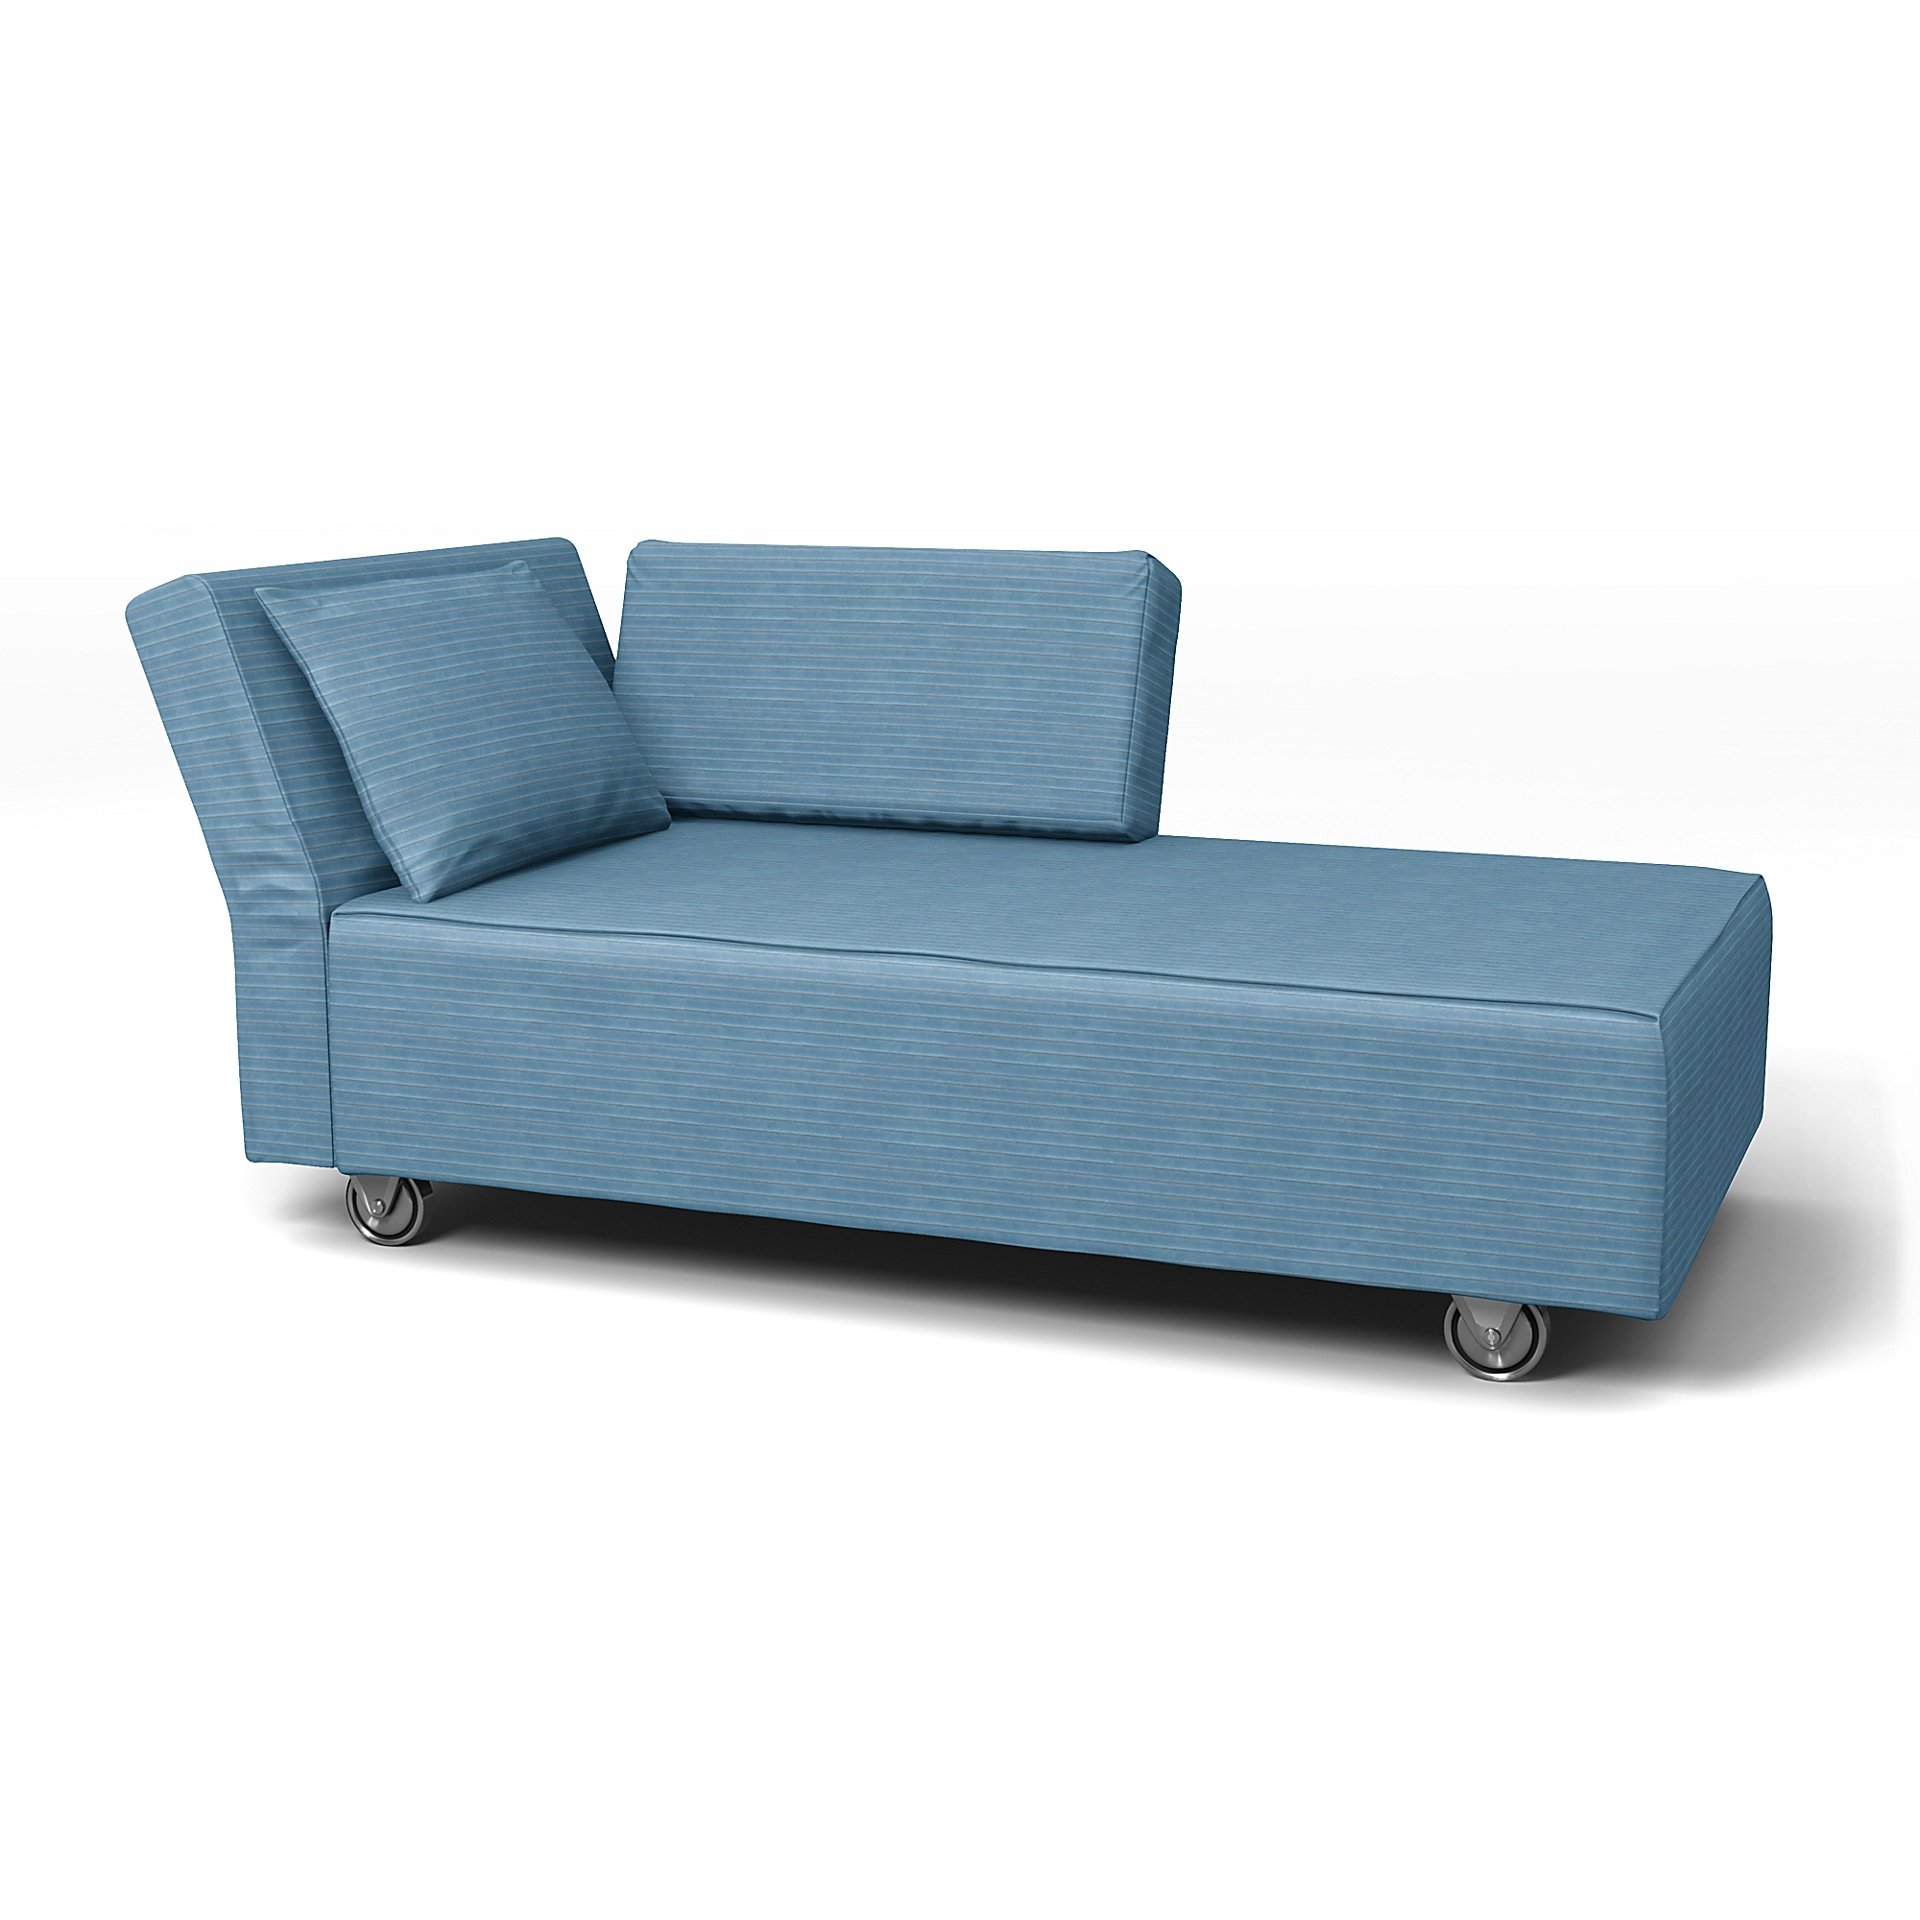 IKEA - Falsterbo Chaise with Left Armrest Cover, Sky Blue, Corduroy - Bemz